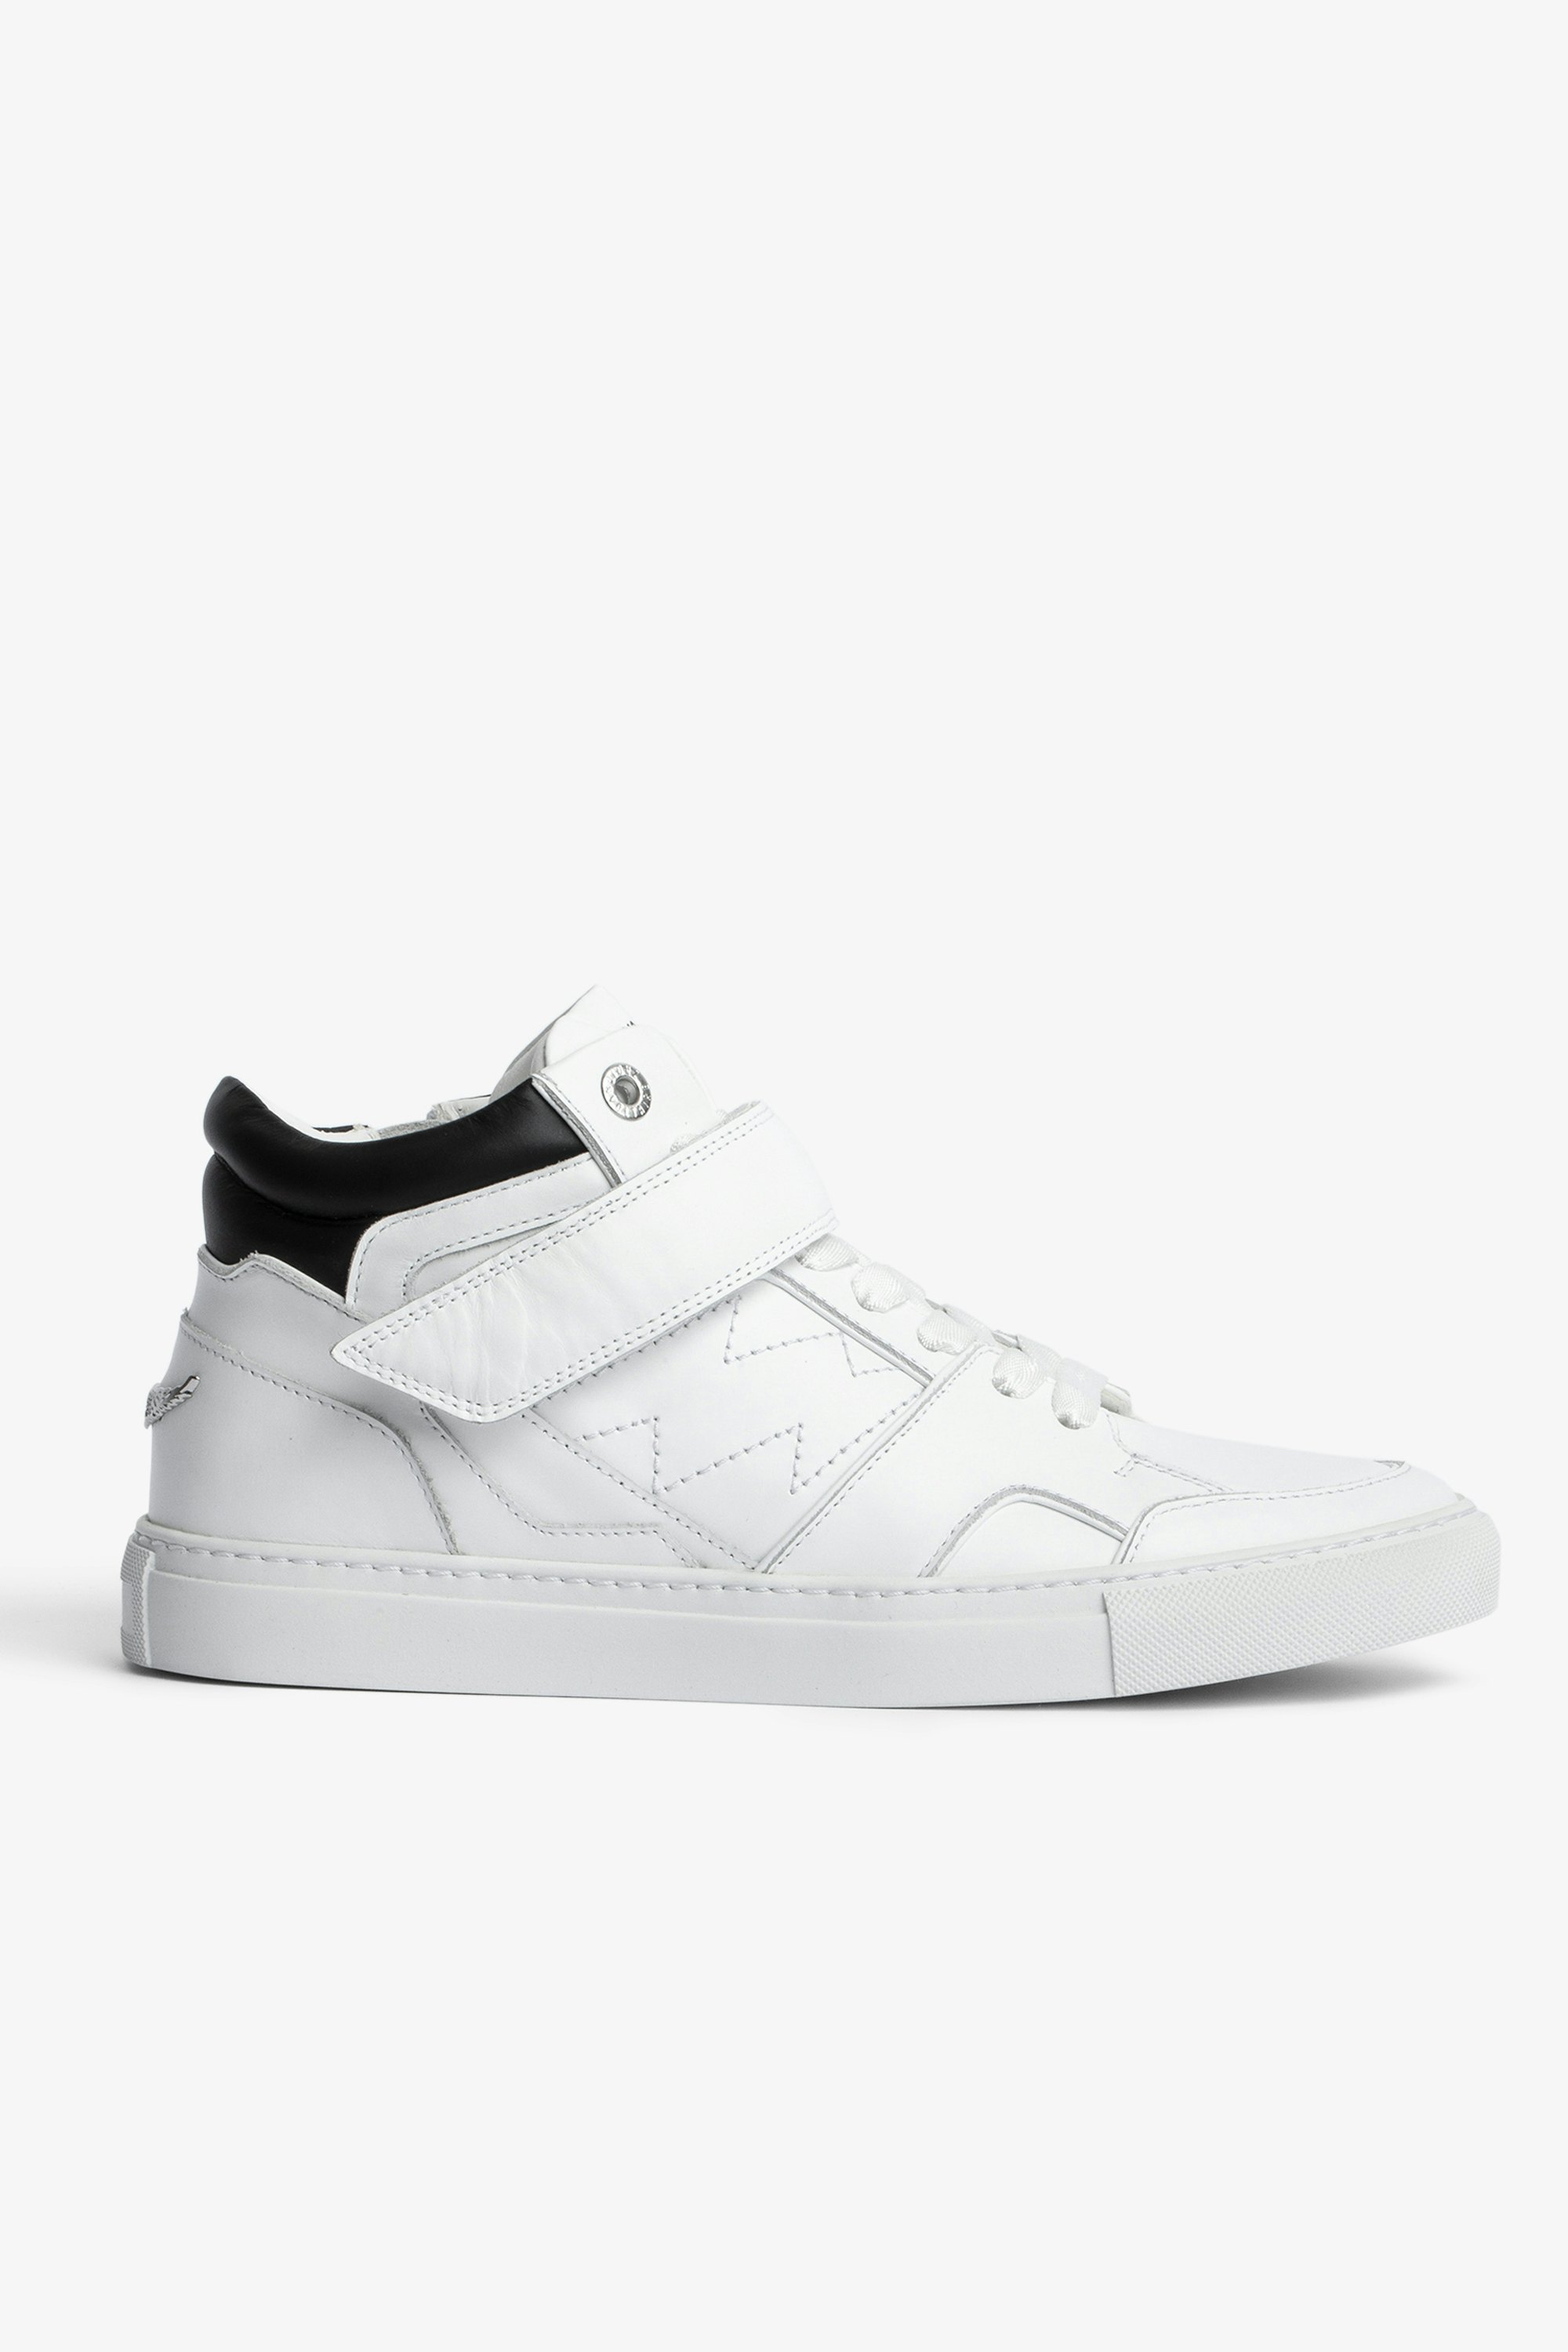 ZV1747 Mid Flash スニーカー Women’s white leather mid-top sneakers